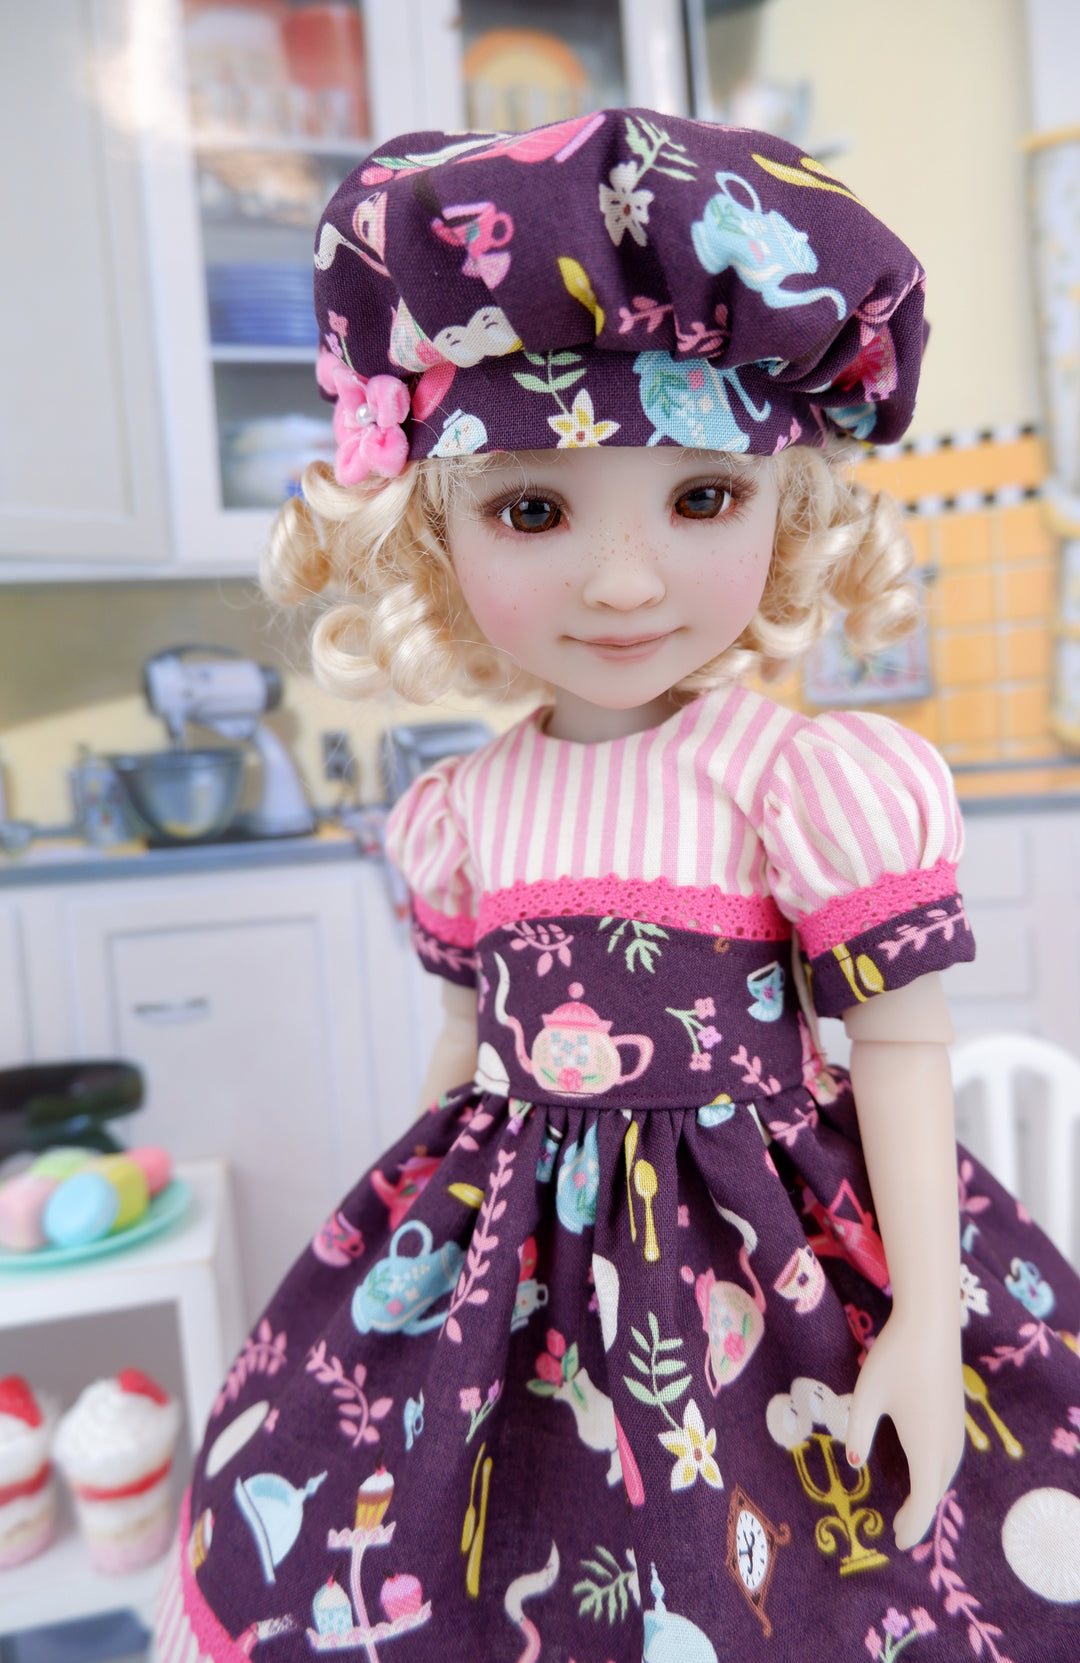 Be Our Guest - dress and shoes for Ruby Red Fashion Friends doll